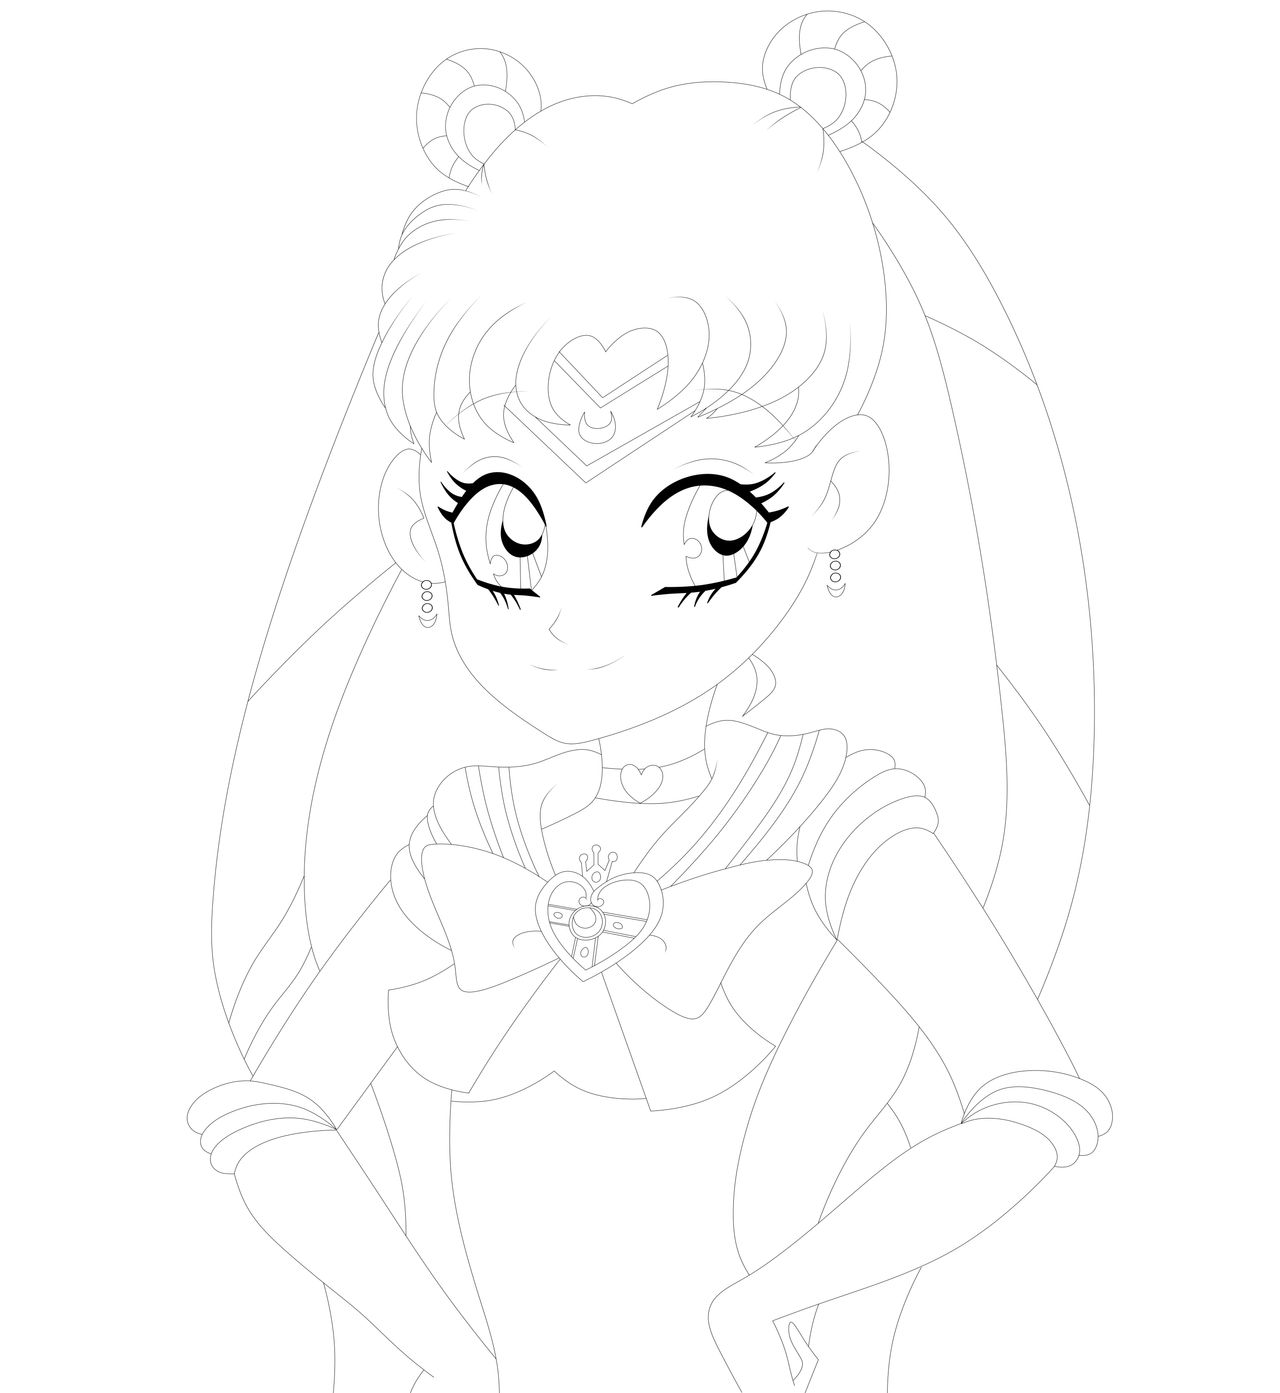 Sailor moon s coloring page by xxmonicaartsxx on